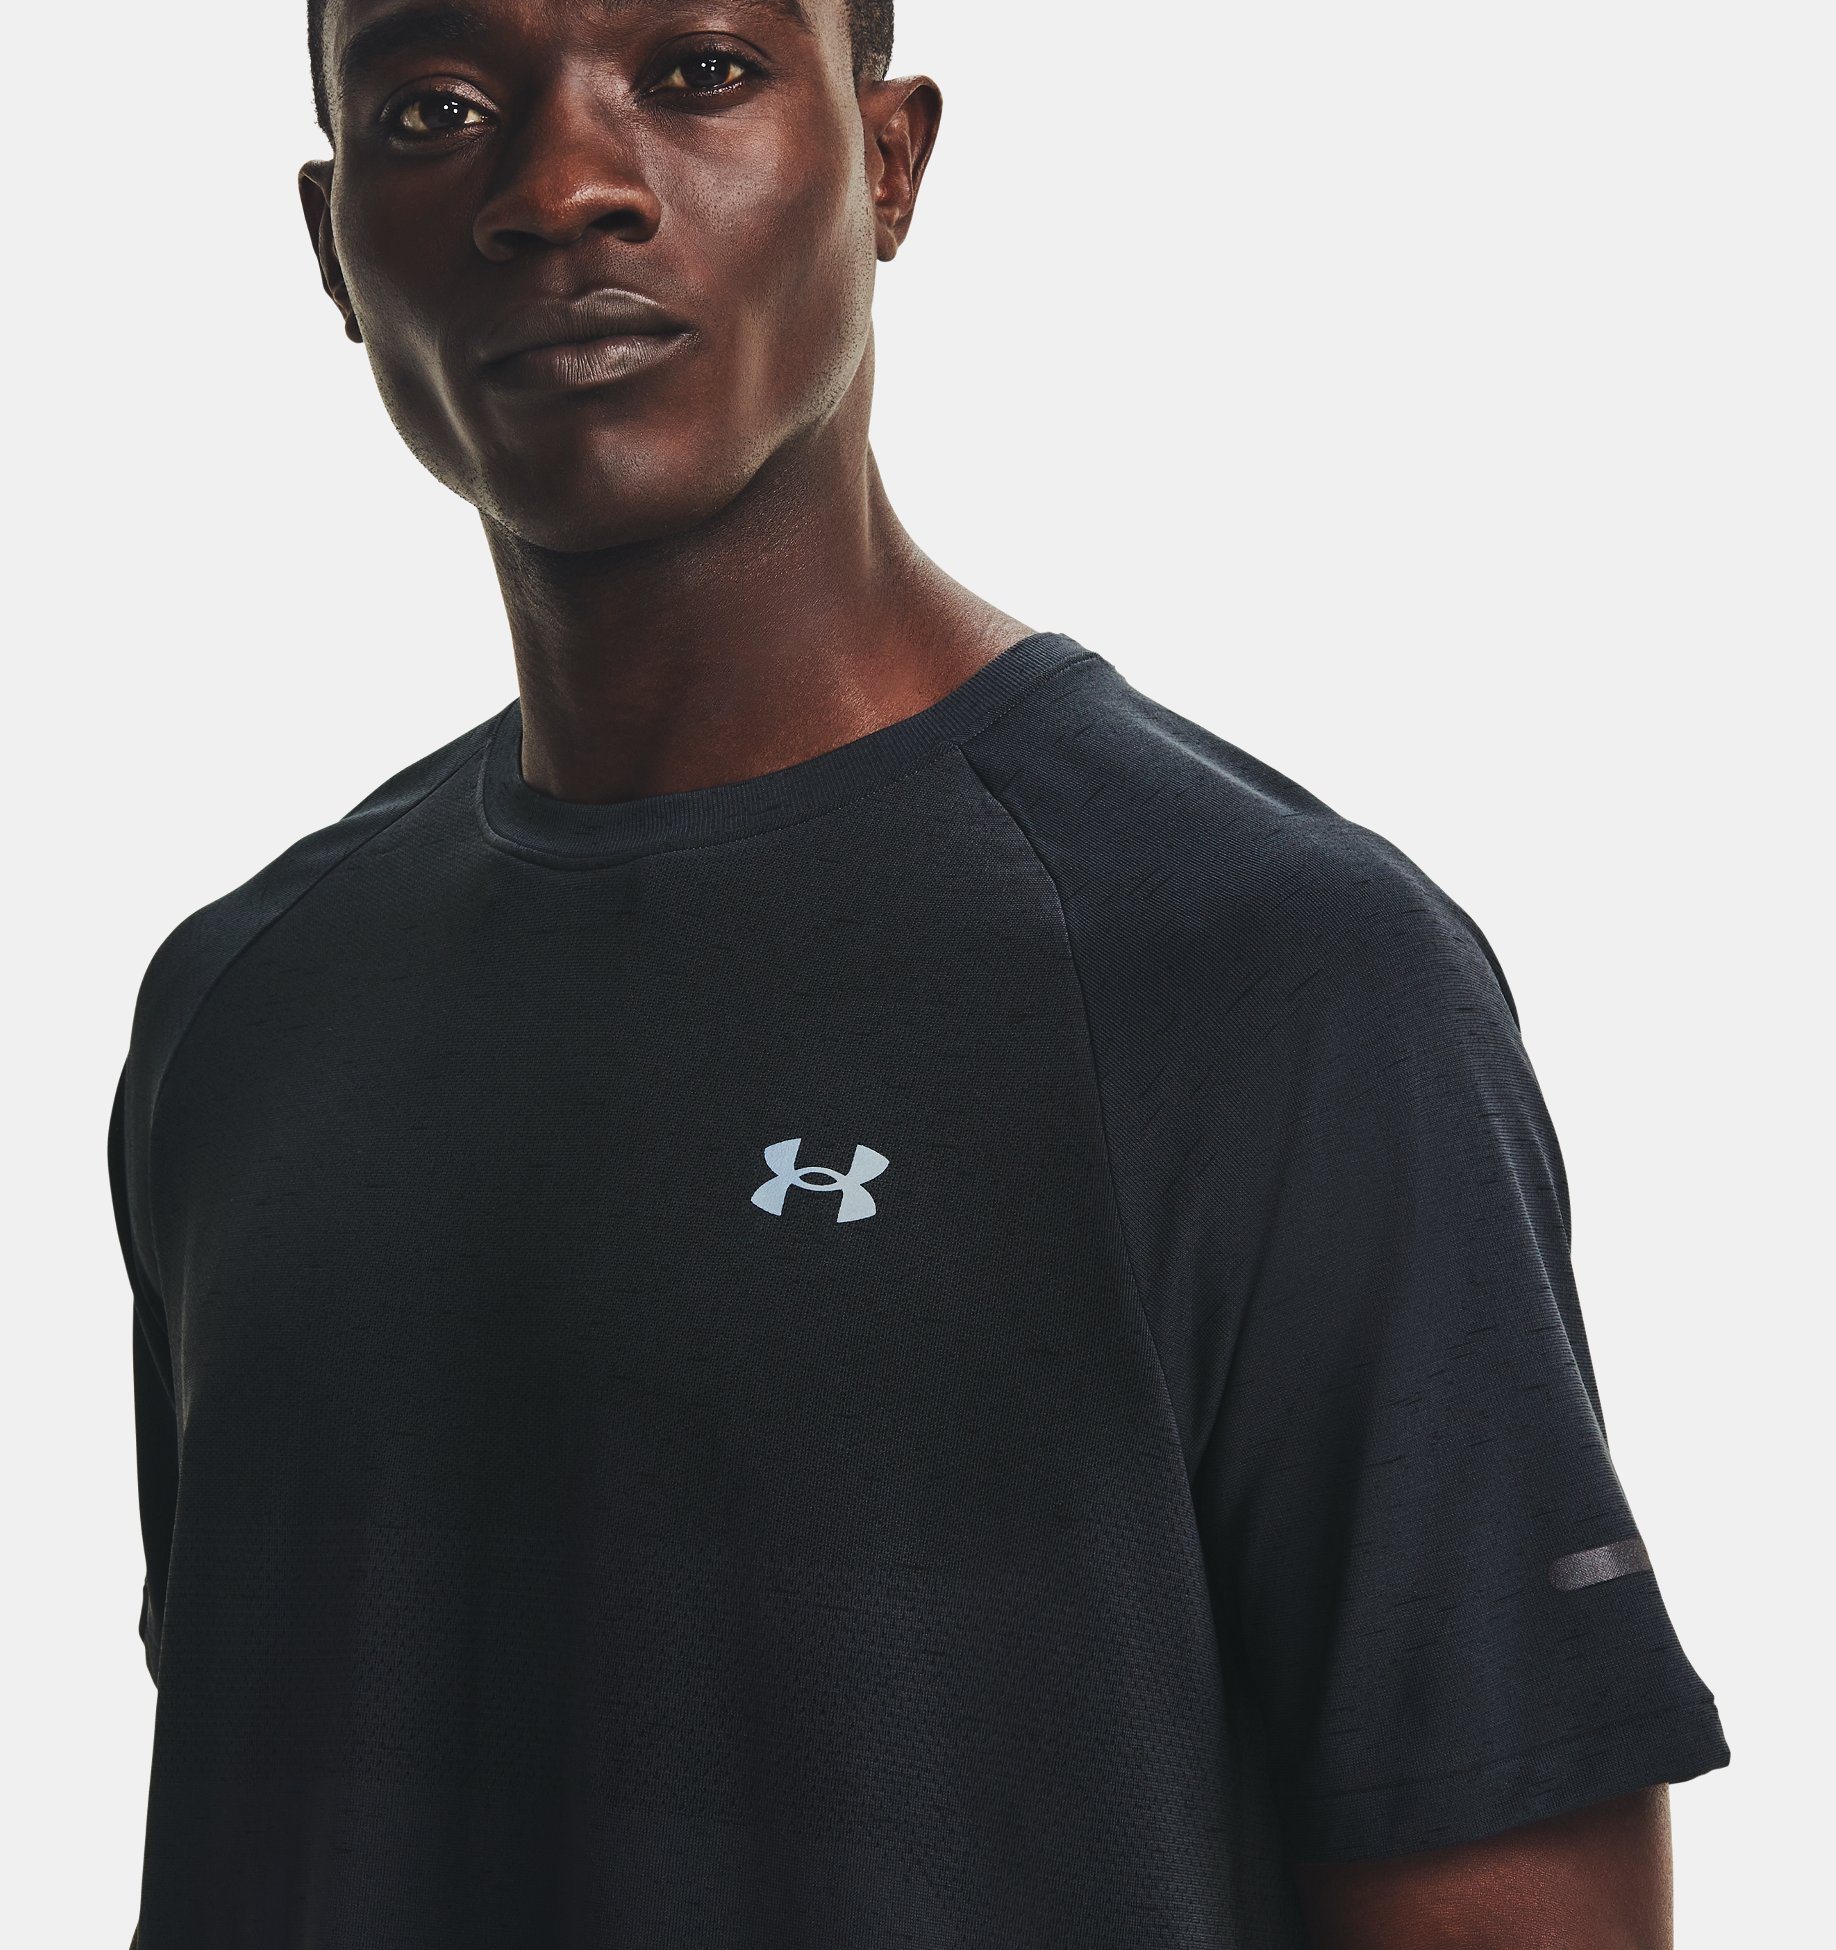 Under Armour Men Vanish Seamless Short Sleeve Mens T Shirt with Tight Cut Cool and Breathable Running Apparel for Men 